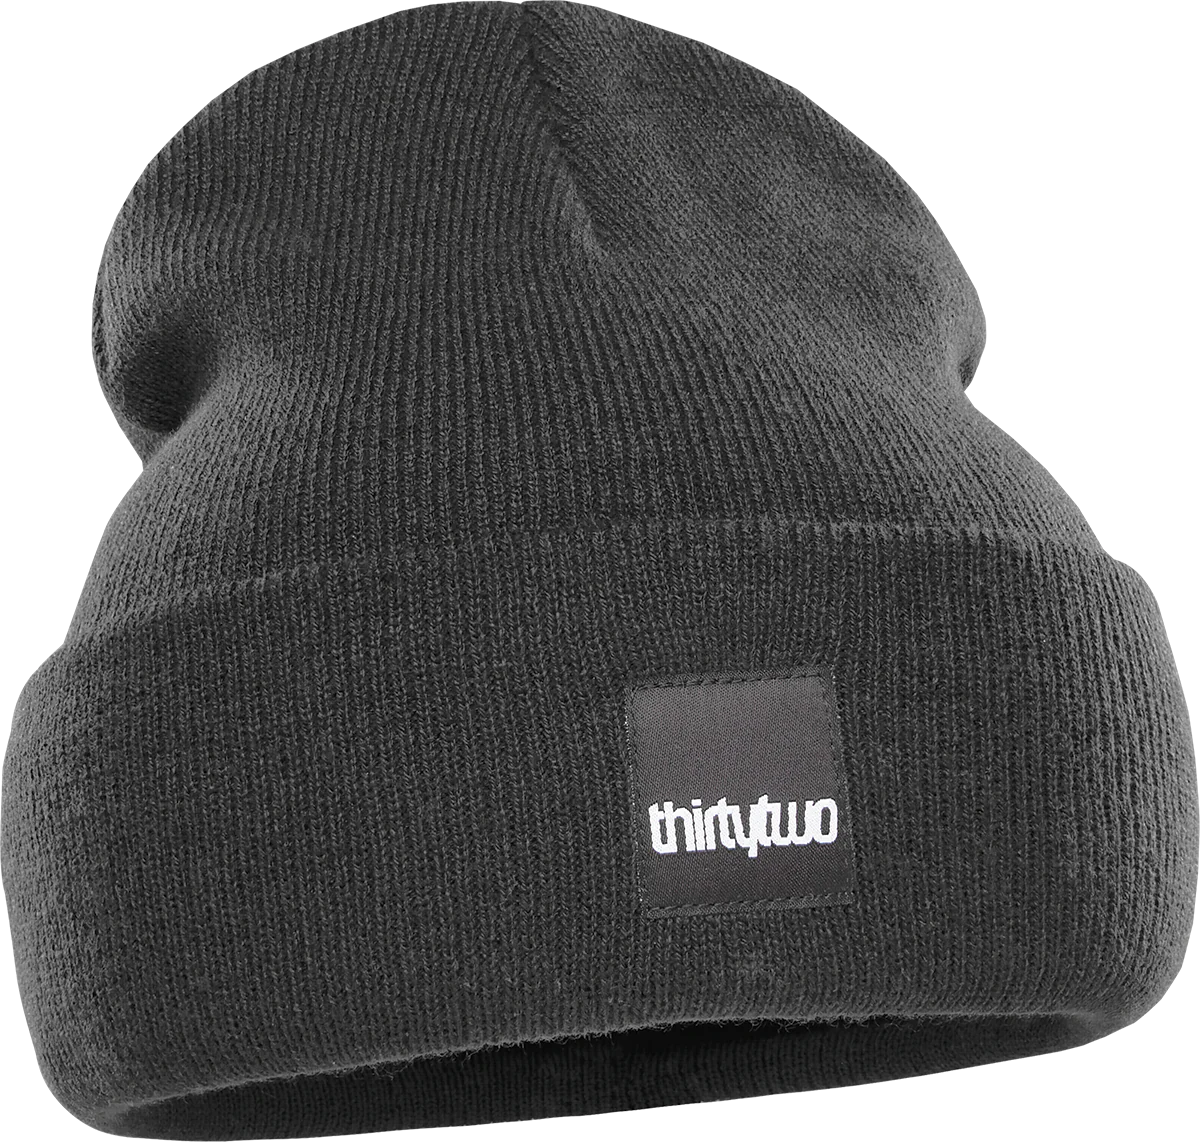 thirtytwo - Patch Beanie